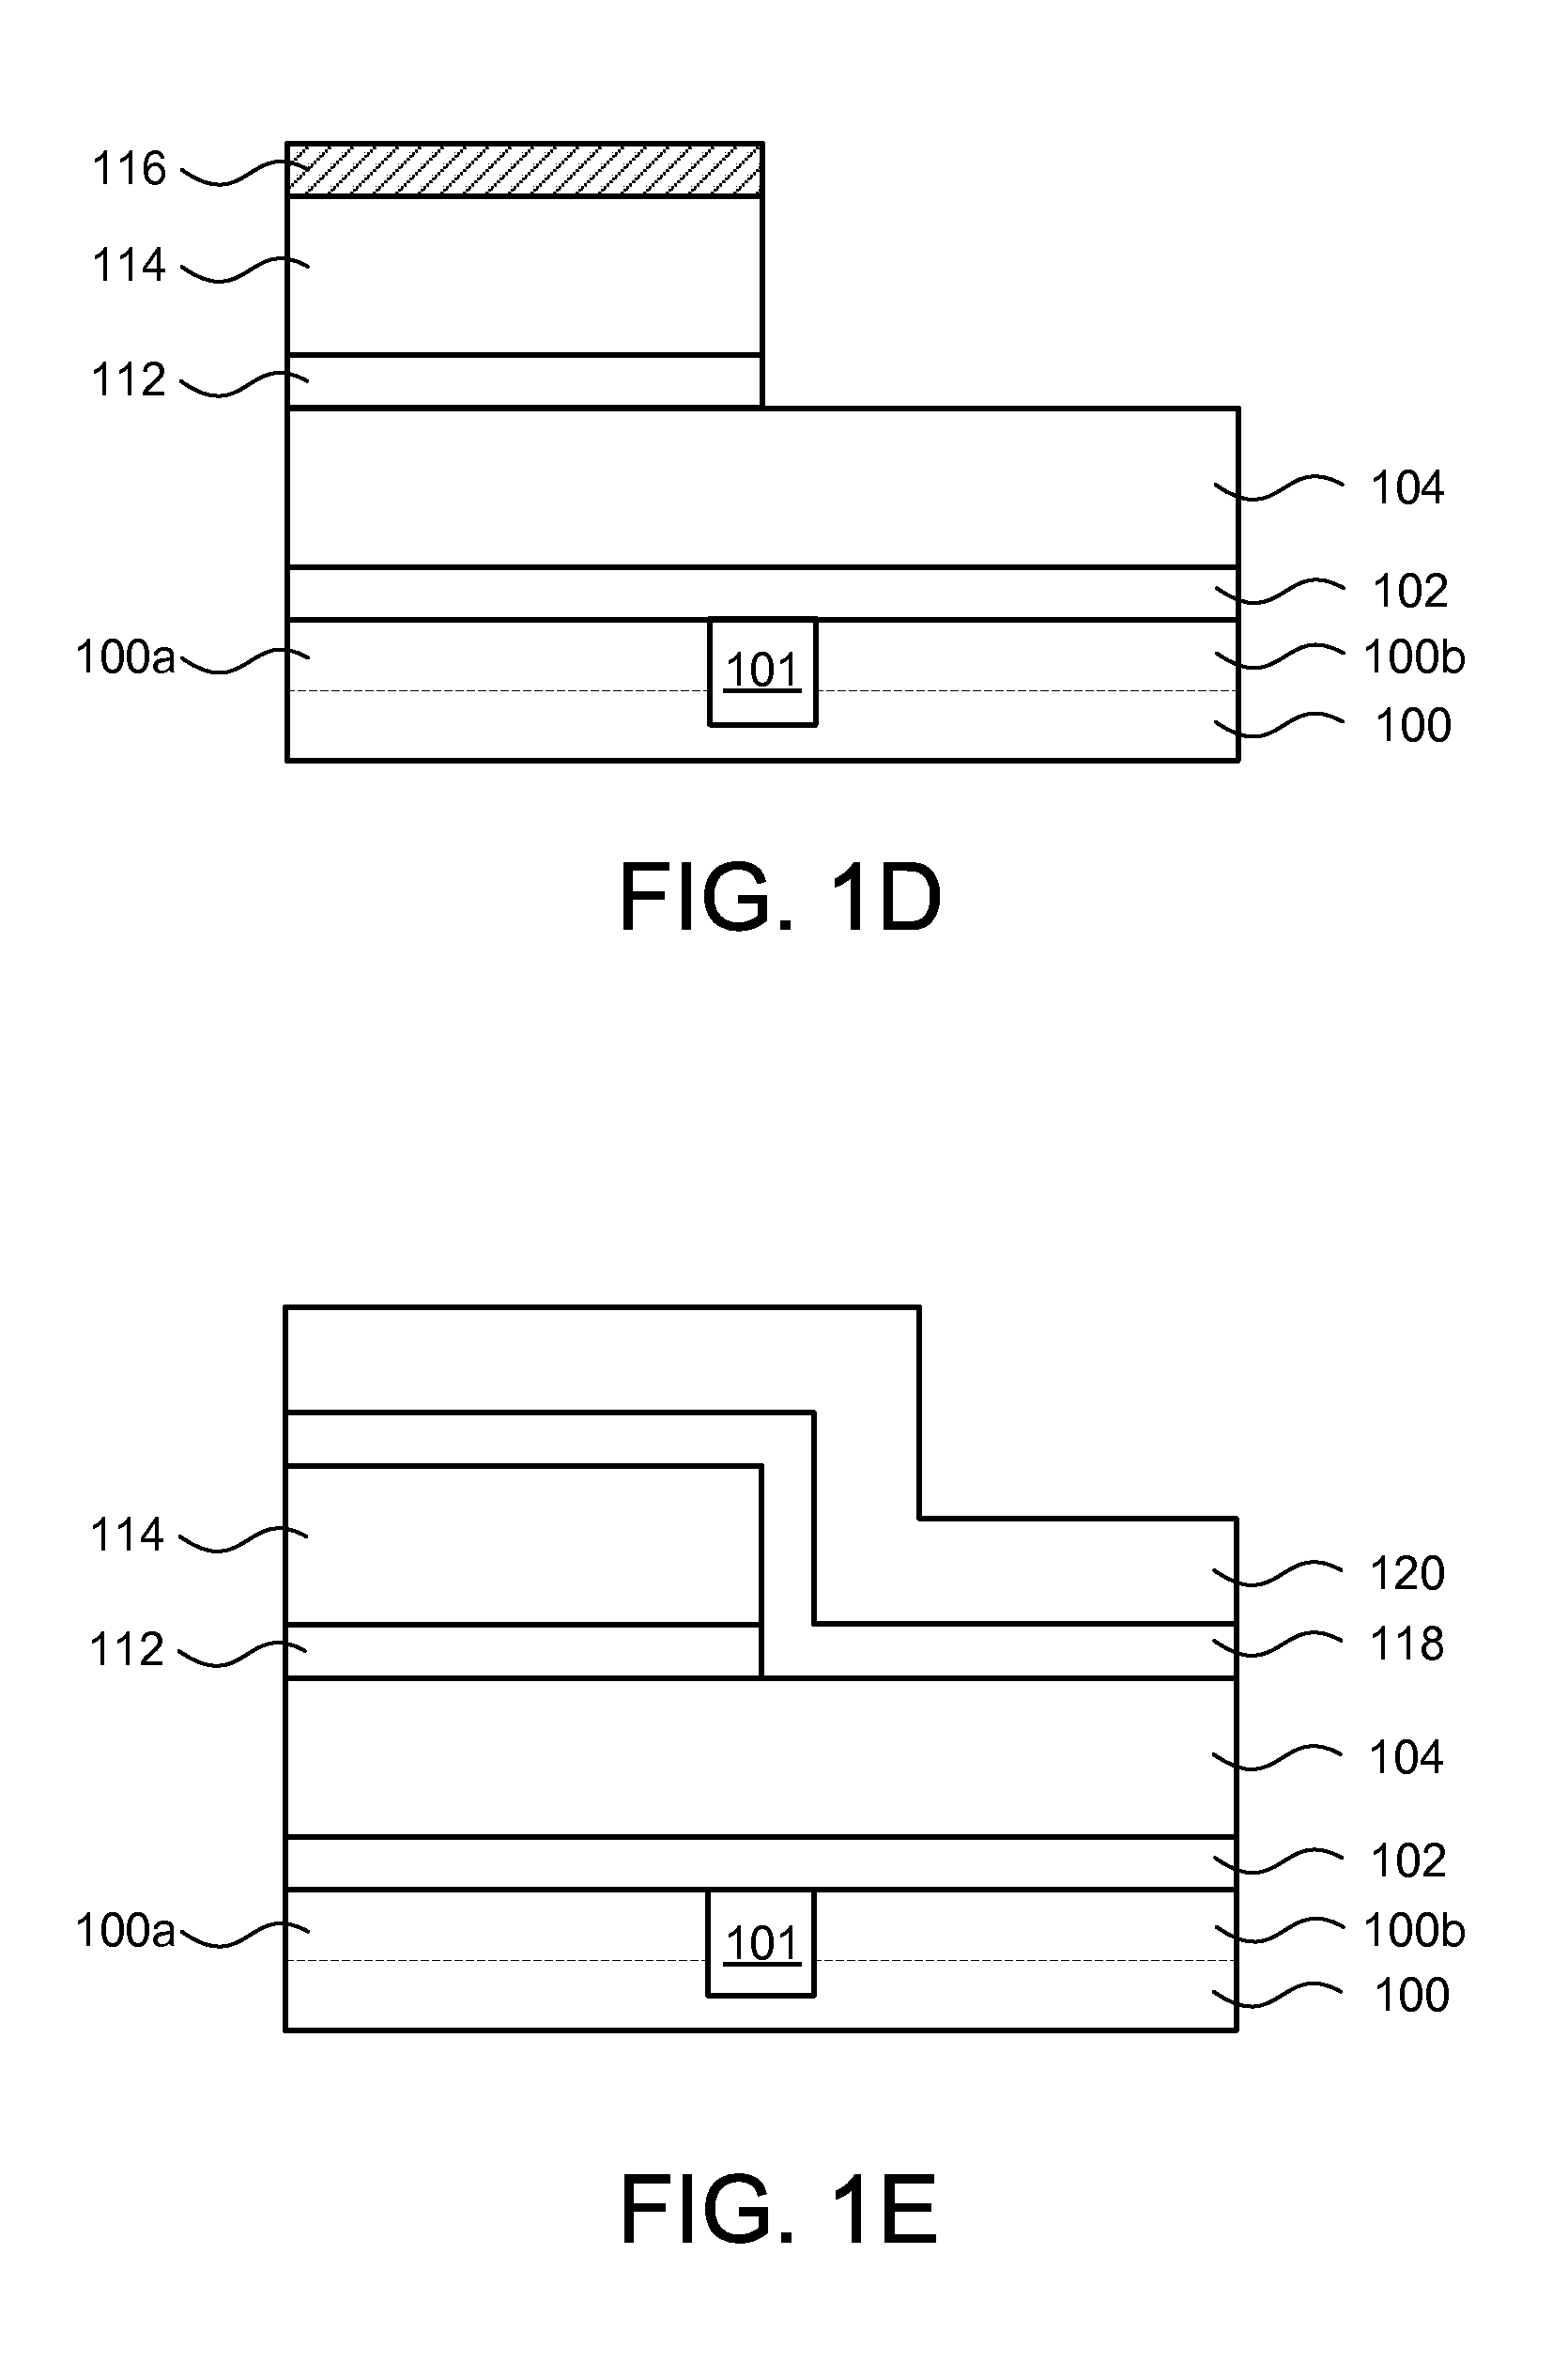 Diffused cap layers for modifying high-k gate dielectrics and interface layers